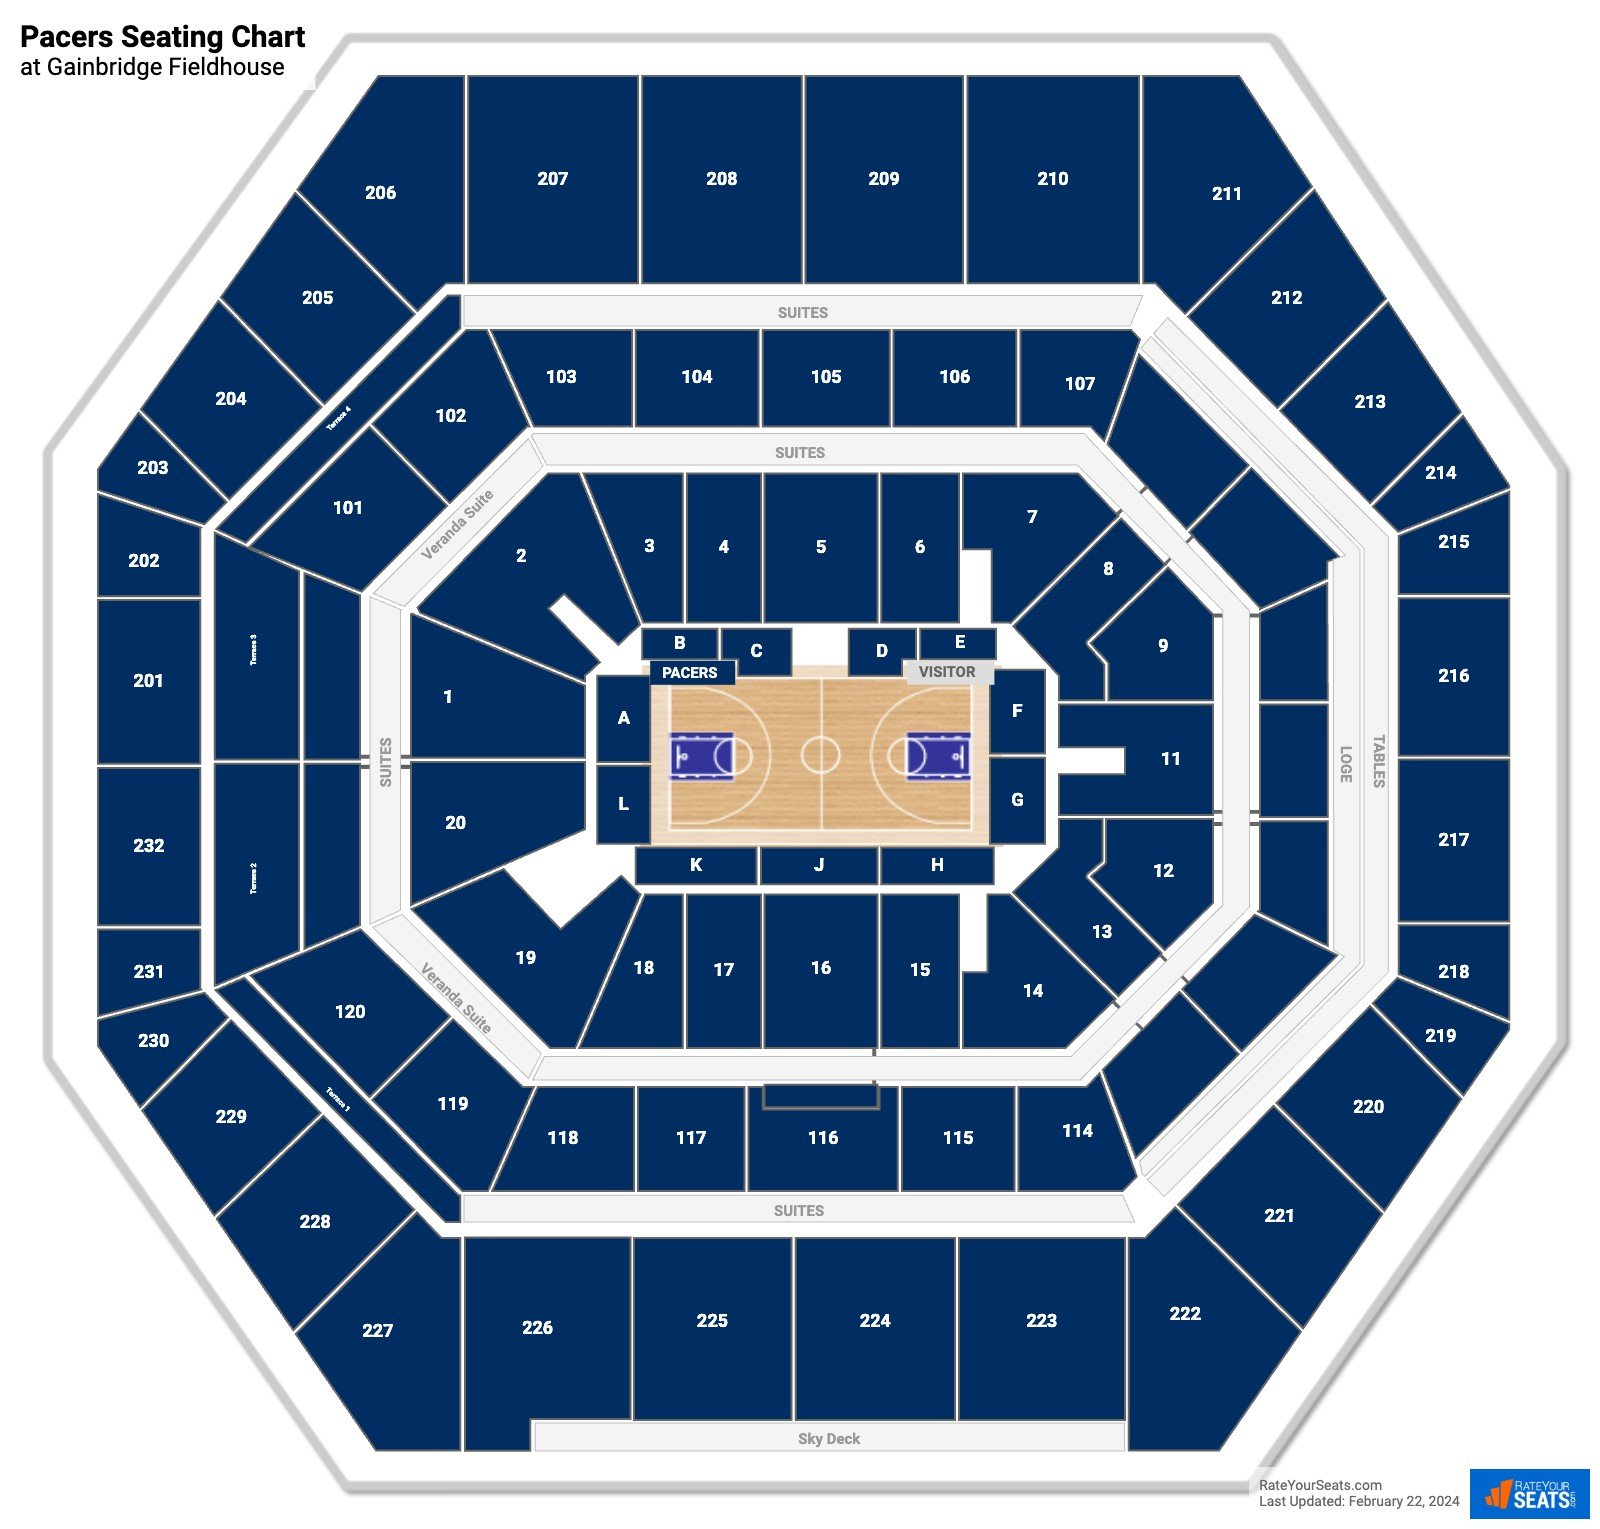 Indiana Pacers Seating Chart at Gainbridge Fieldhouse